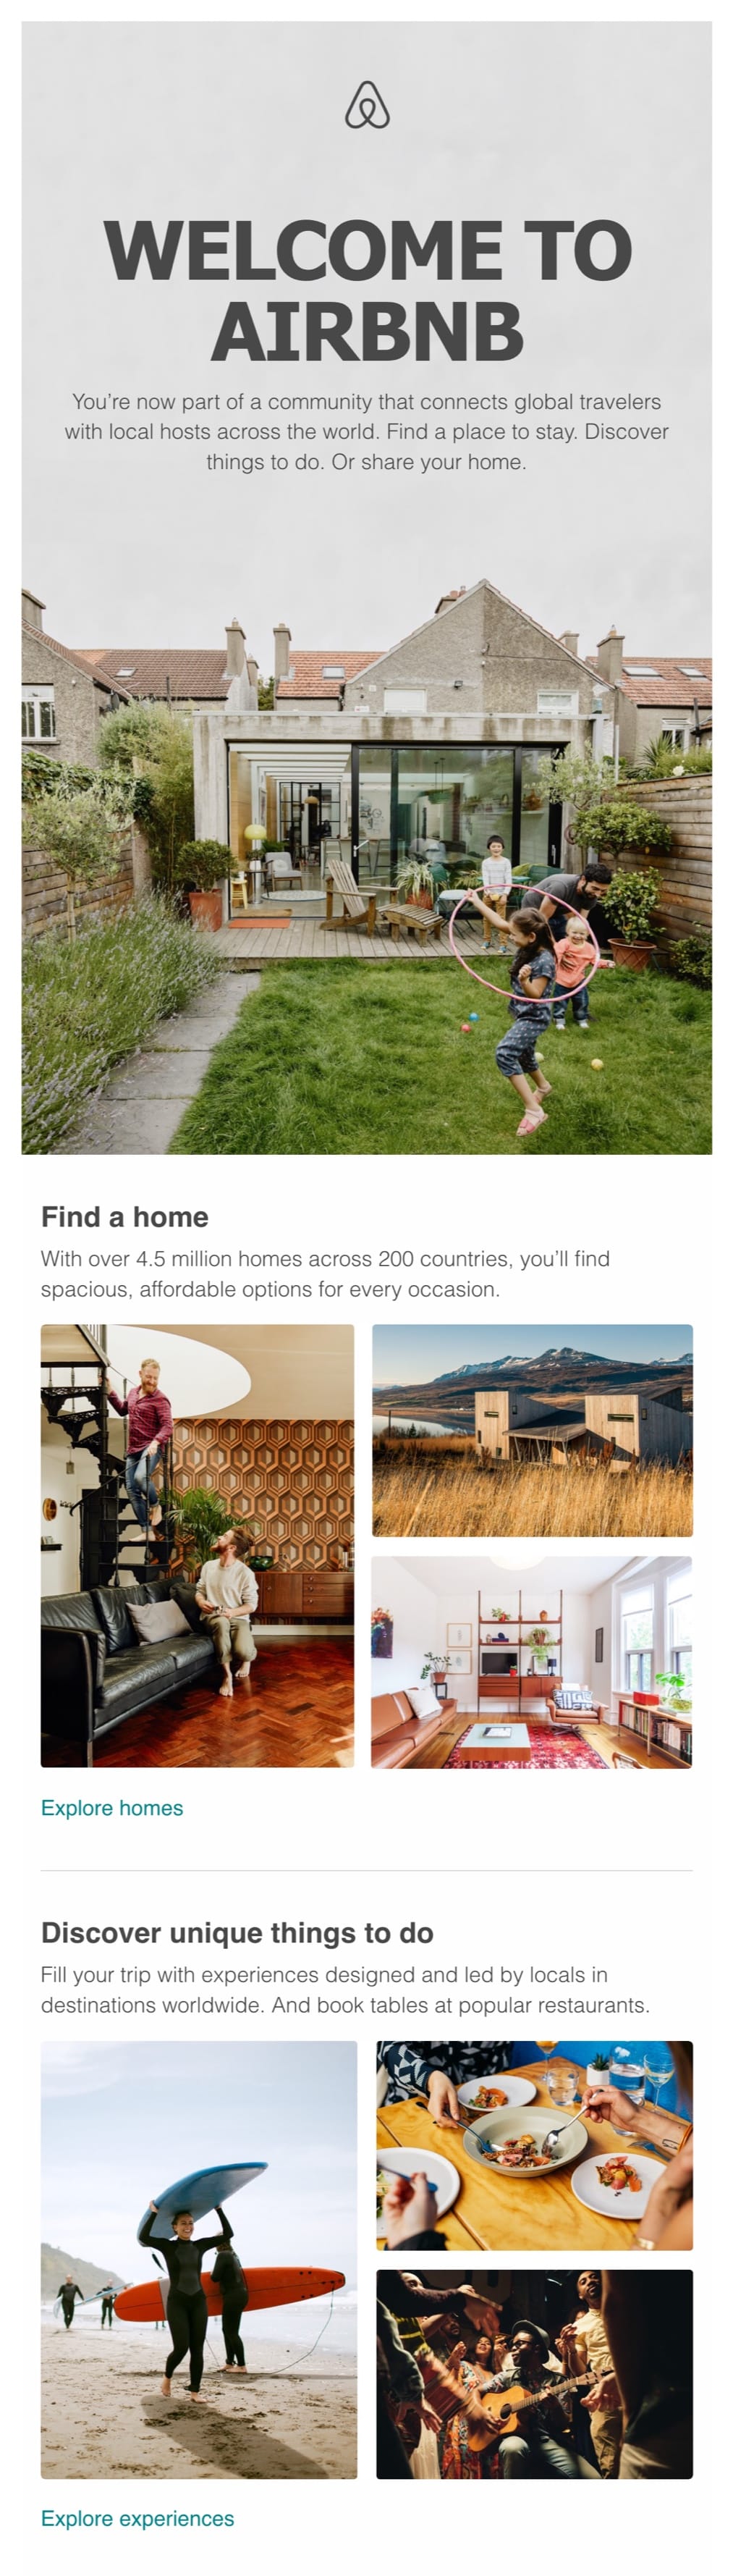 welcome email example airbnb